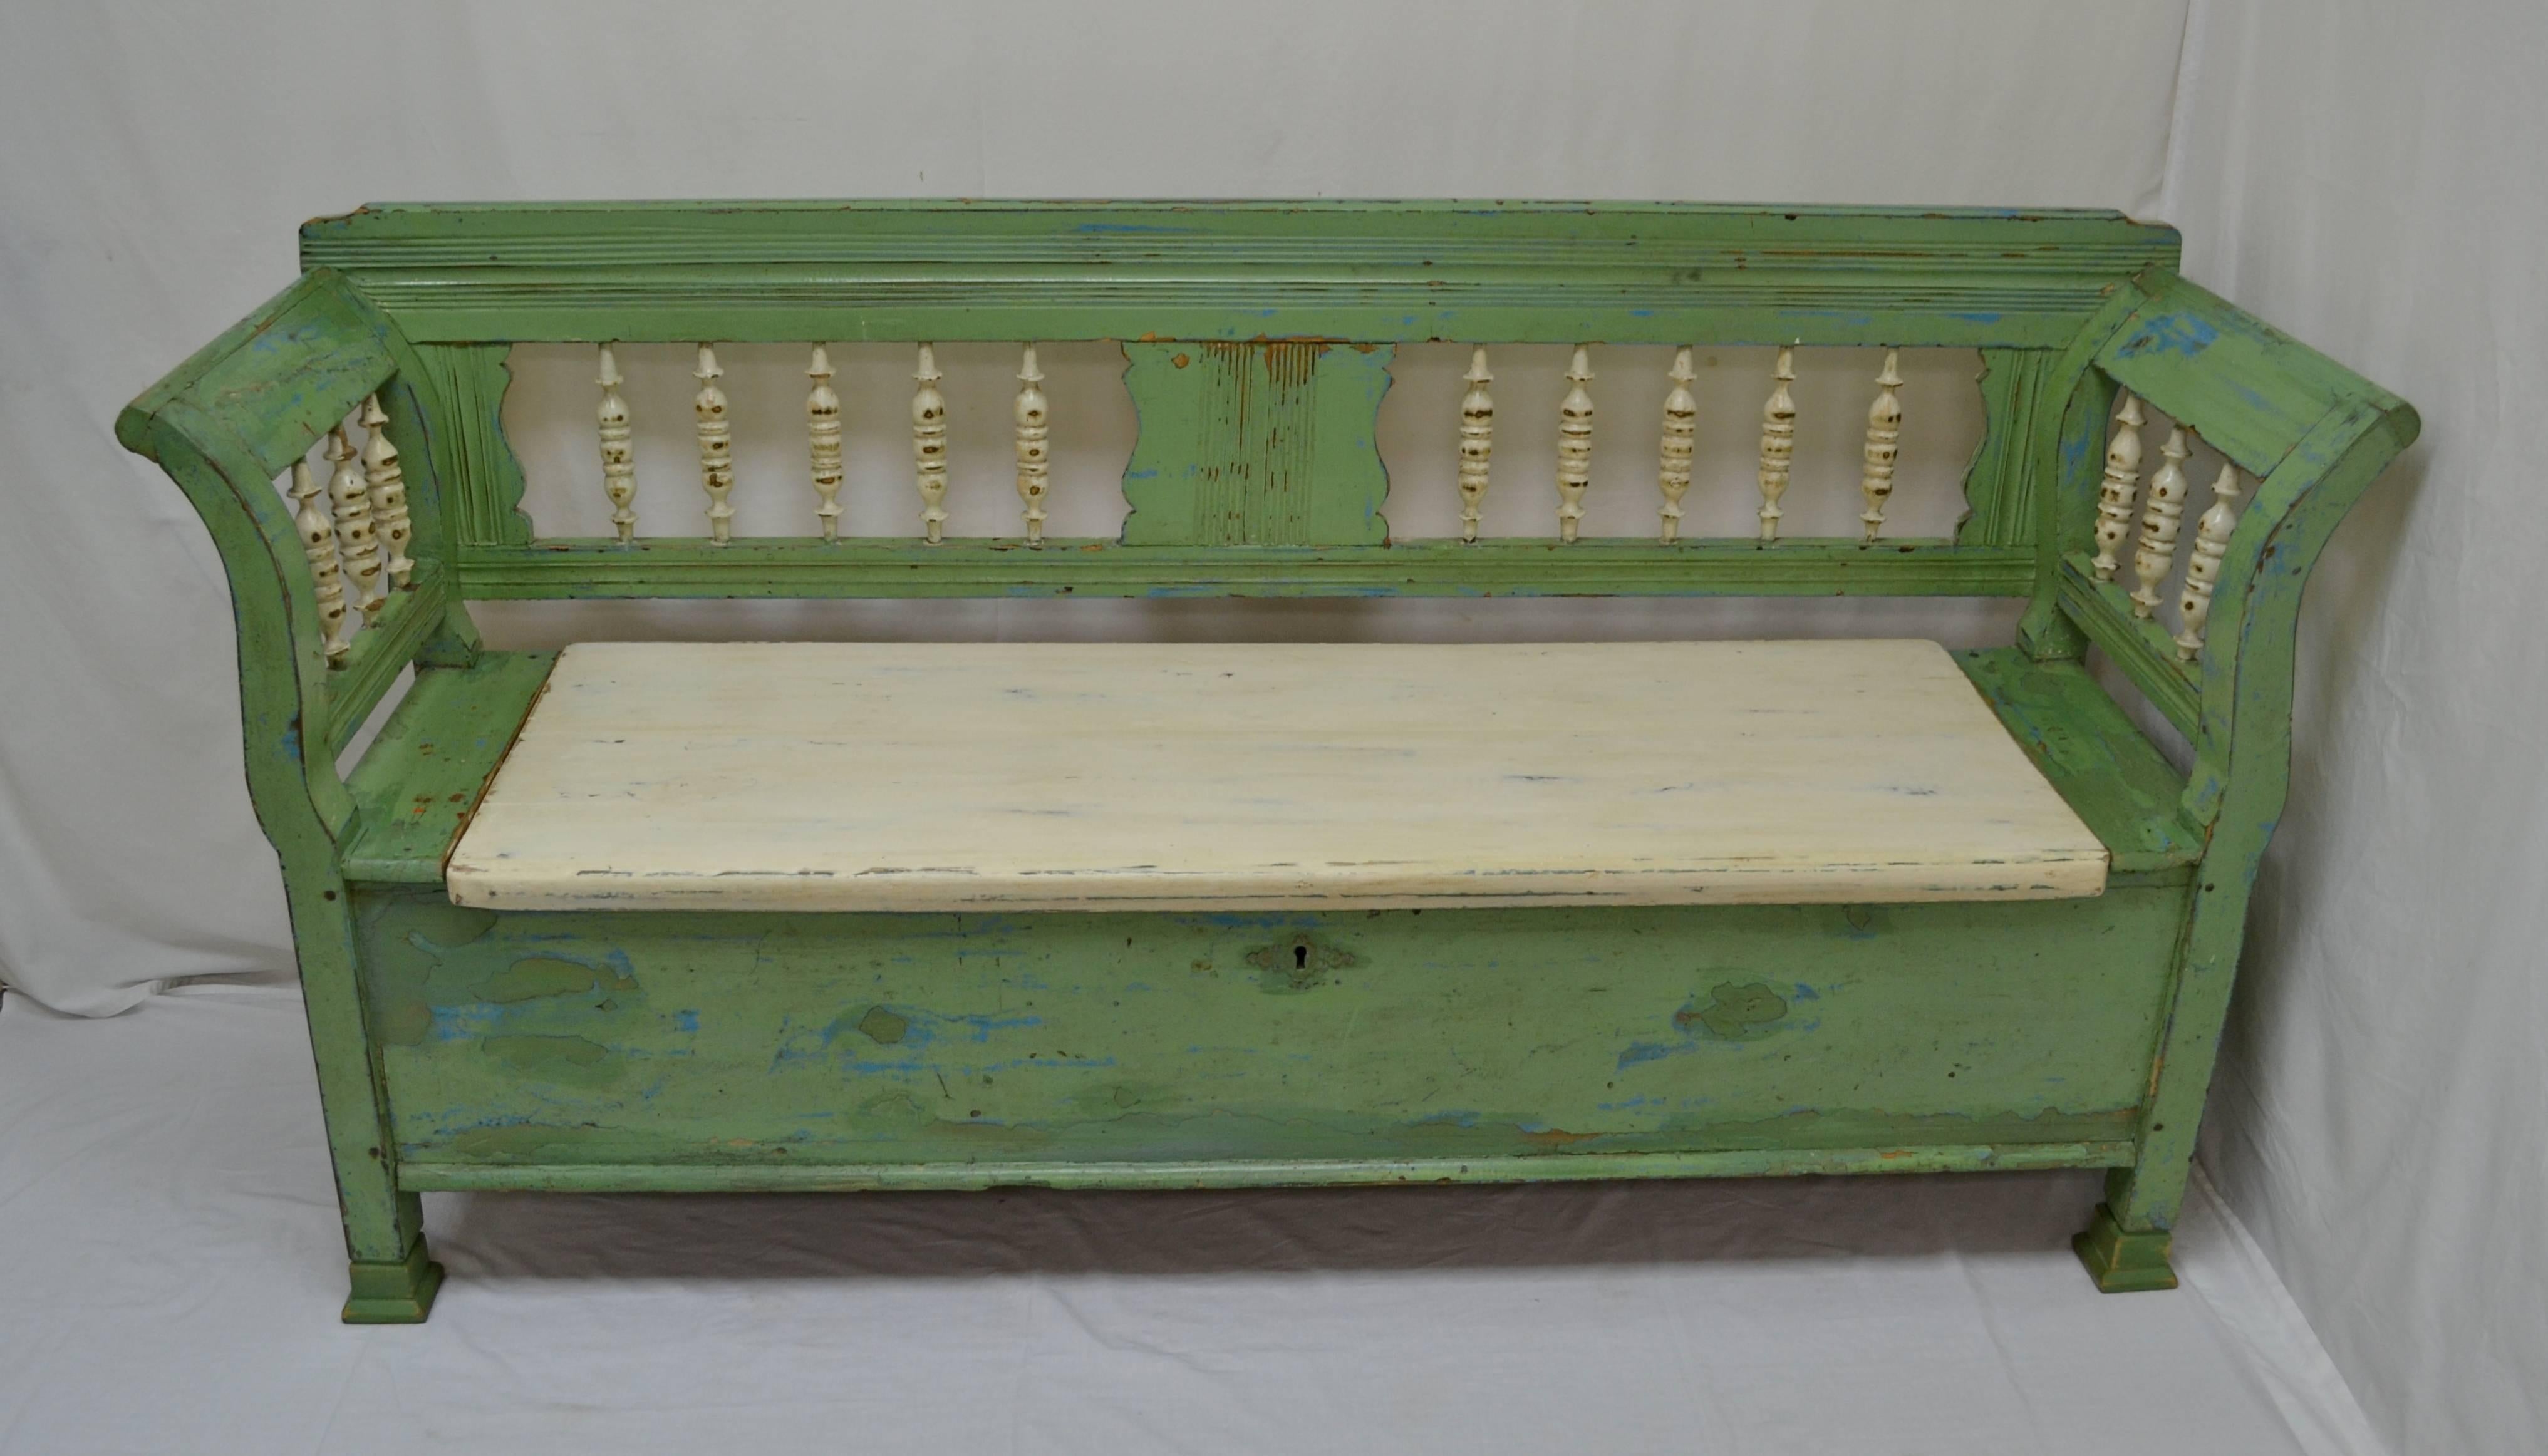 This exceptional pine box bench with oak legs has a rather stately appearance. The straight top rail, nicely cut-away at the ends has two rows of incised fluting, which are repeated vertically on the central back splat, which separates two rows of